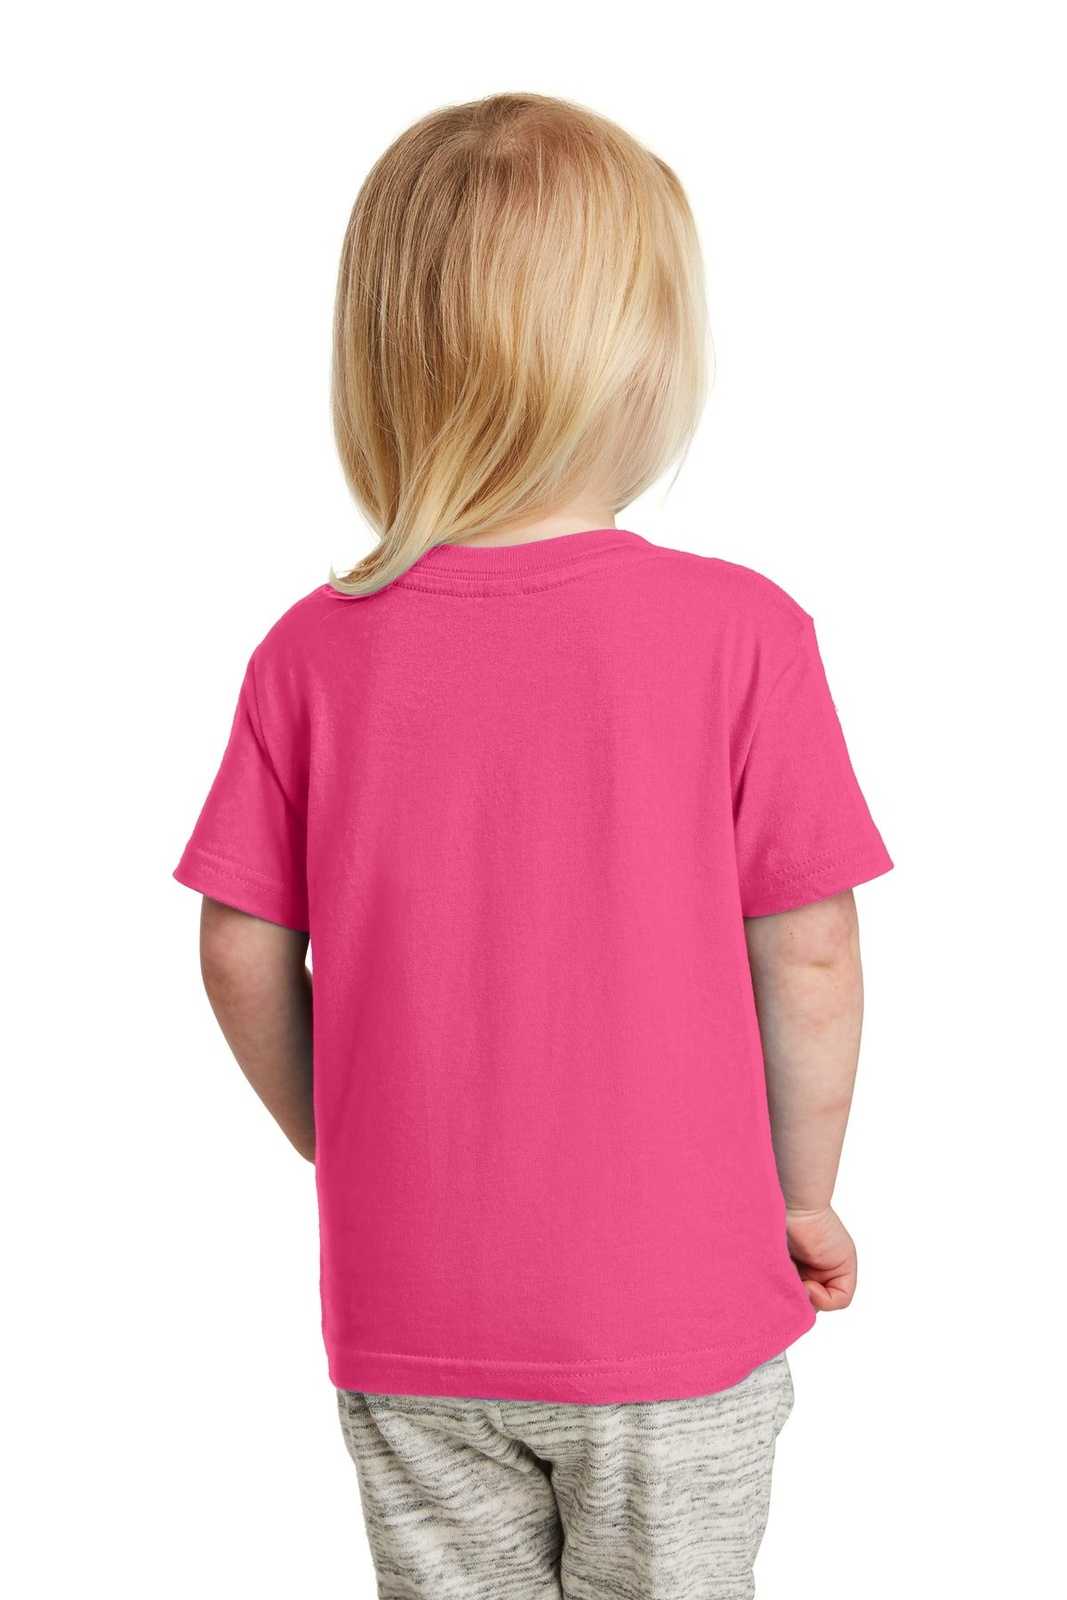 Rabbit Skins 3321 Toddler Fine Jersey Tee - Hot Pink - HIT a Double